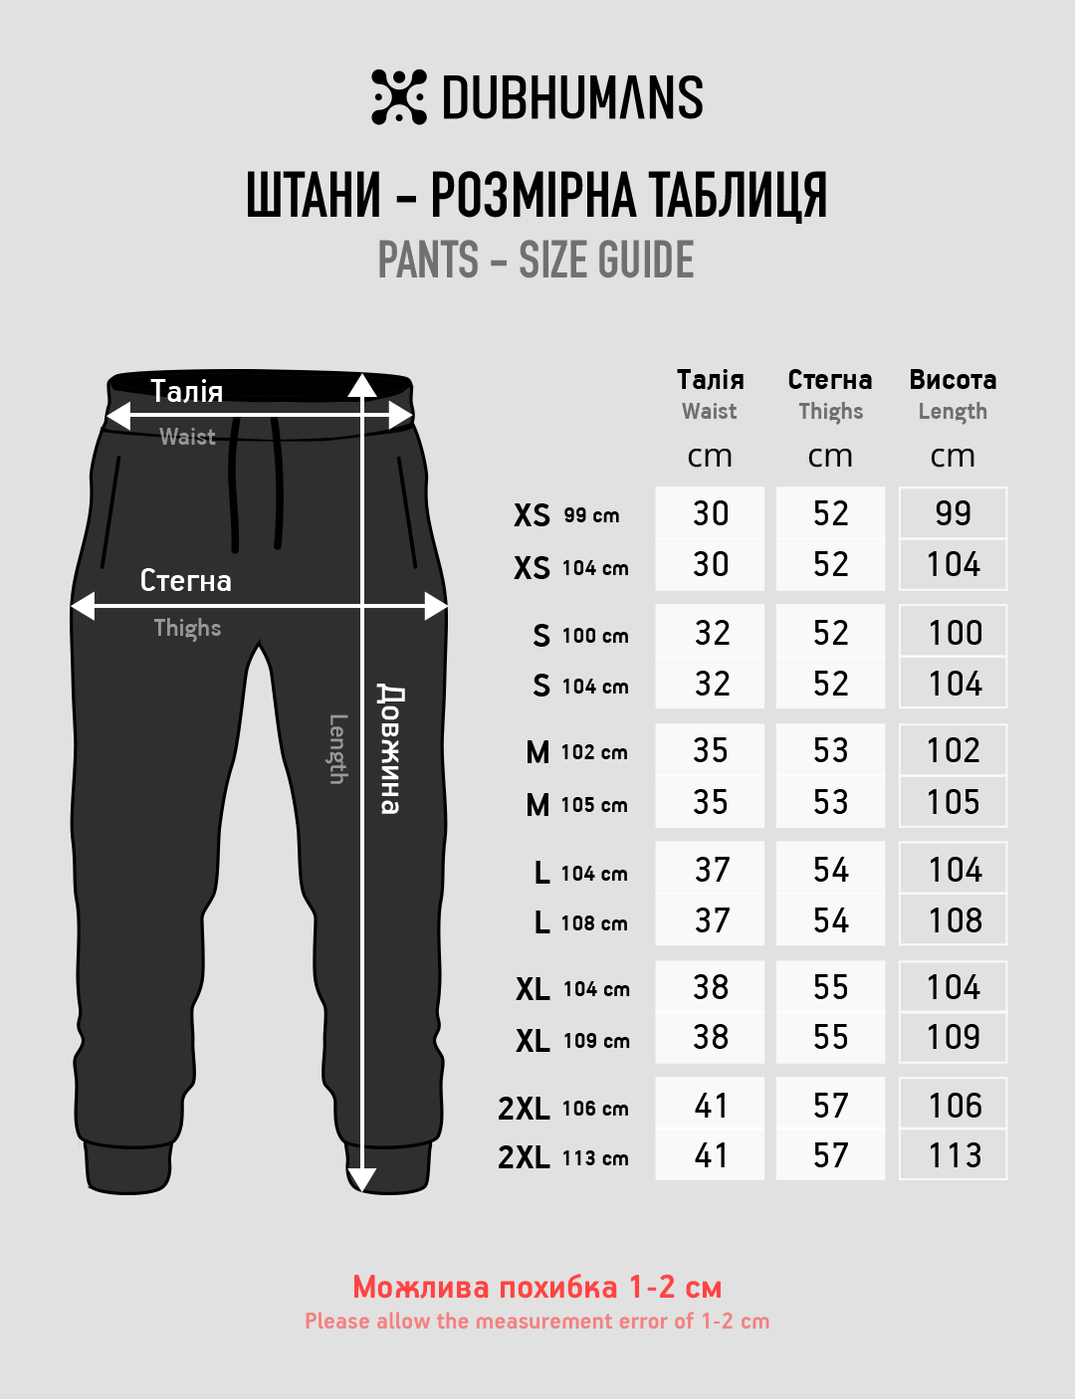 Women's tracksuit set Hoodie black with a Changeable Patch "Tractor steals a Tank", Black, XS-S, XS (99  cm)